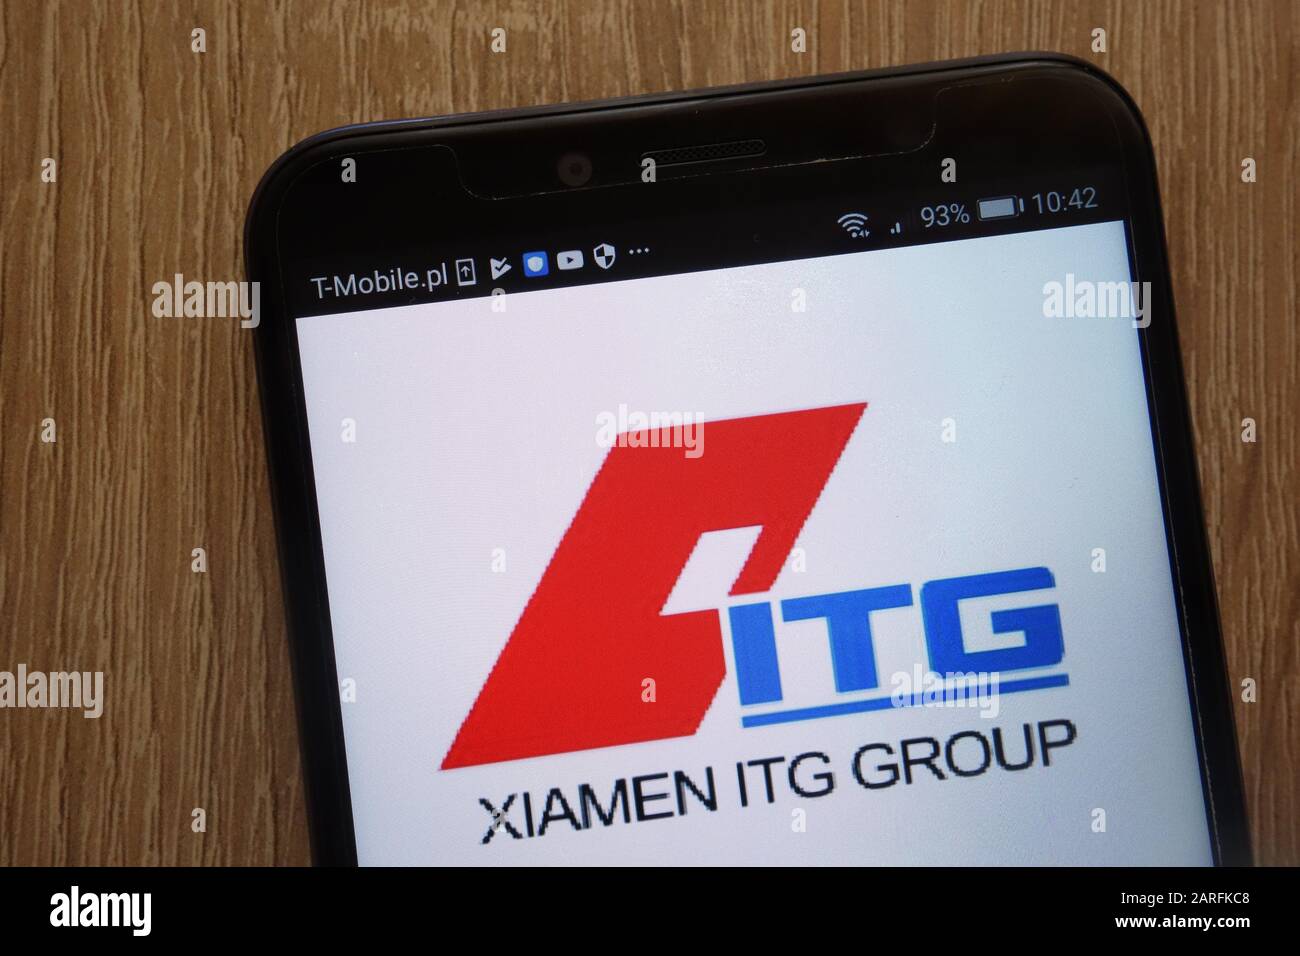 Xiamen ITG Holding Group logo displayed on a modern smartphone Stock Photo